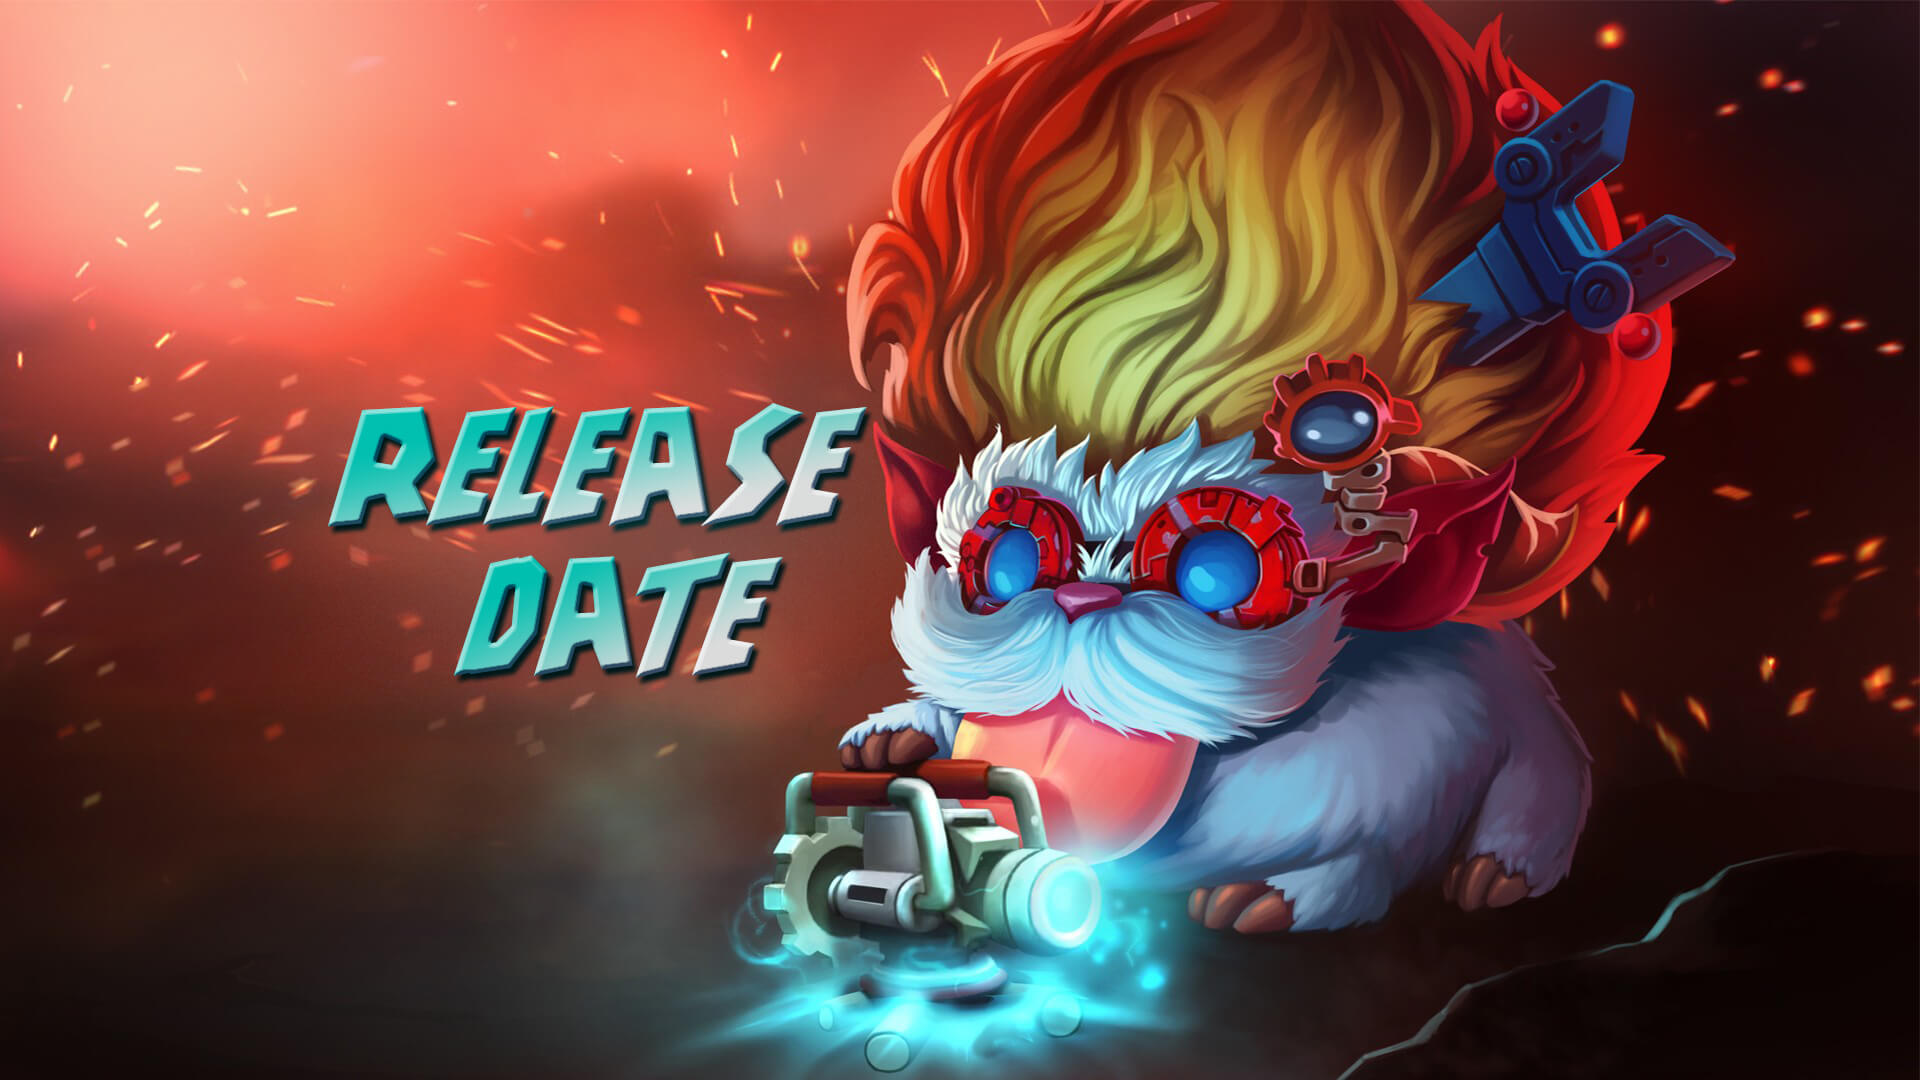 Official Riot Games Support Image with Release Date in JMH Super Science Font